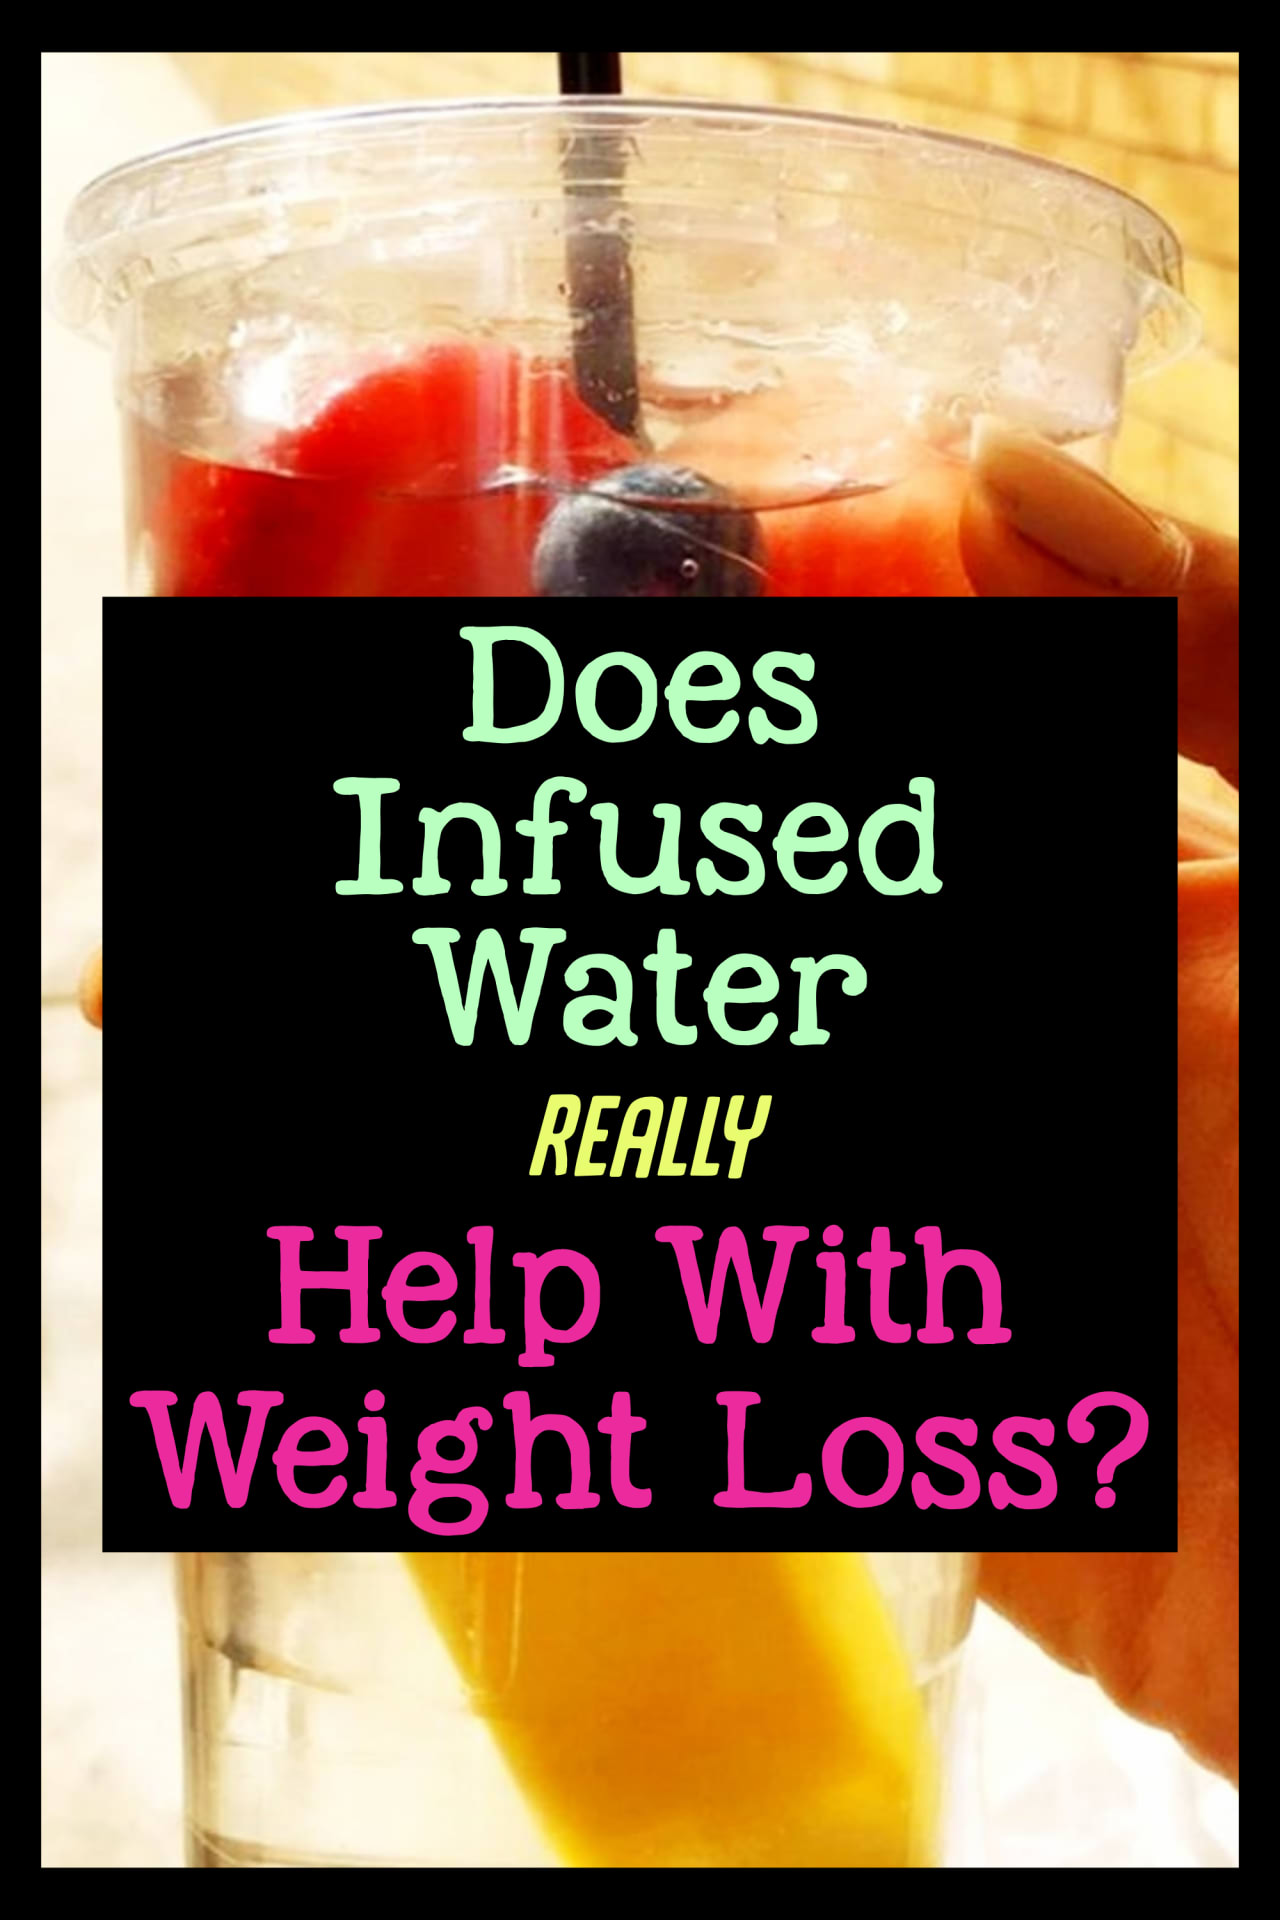 Infused Water Recipes For Weight Loss - Do They REALLY Help You Lose Weight? There are a lot of fruit infused water combinations including orange infused water, cucumber, strawberry flavored infused water etc. If you're learning how to make infused water for weight loss, you need to be sure those infused water recipes will actually HELP you lose weight.